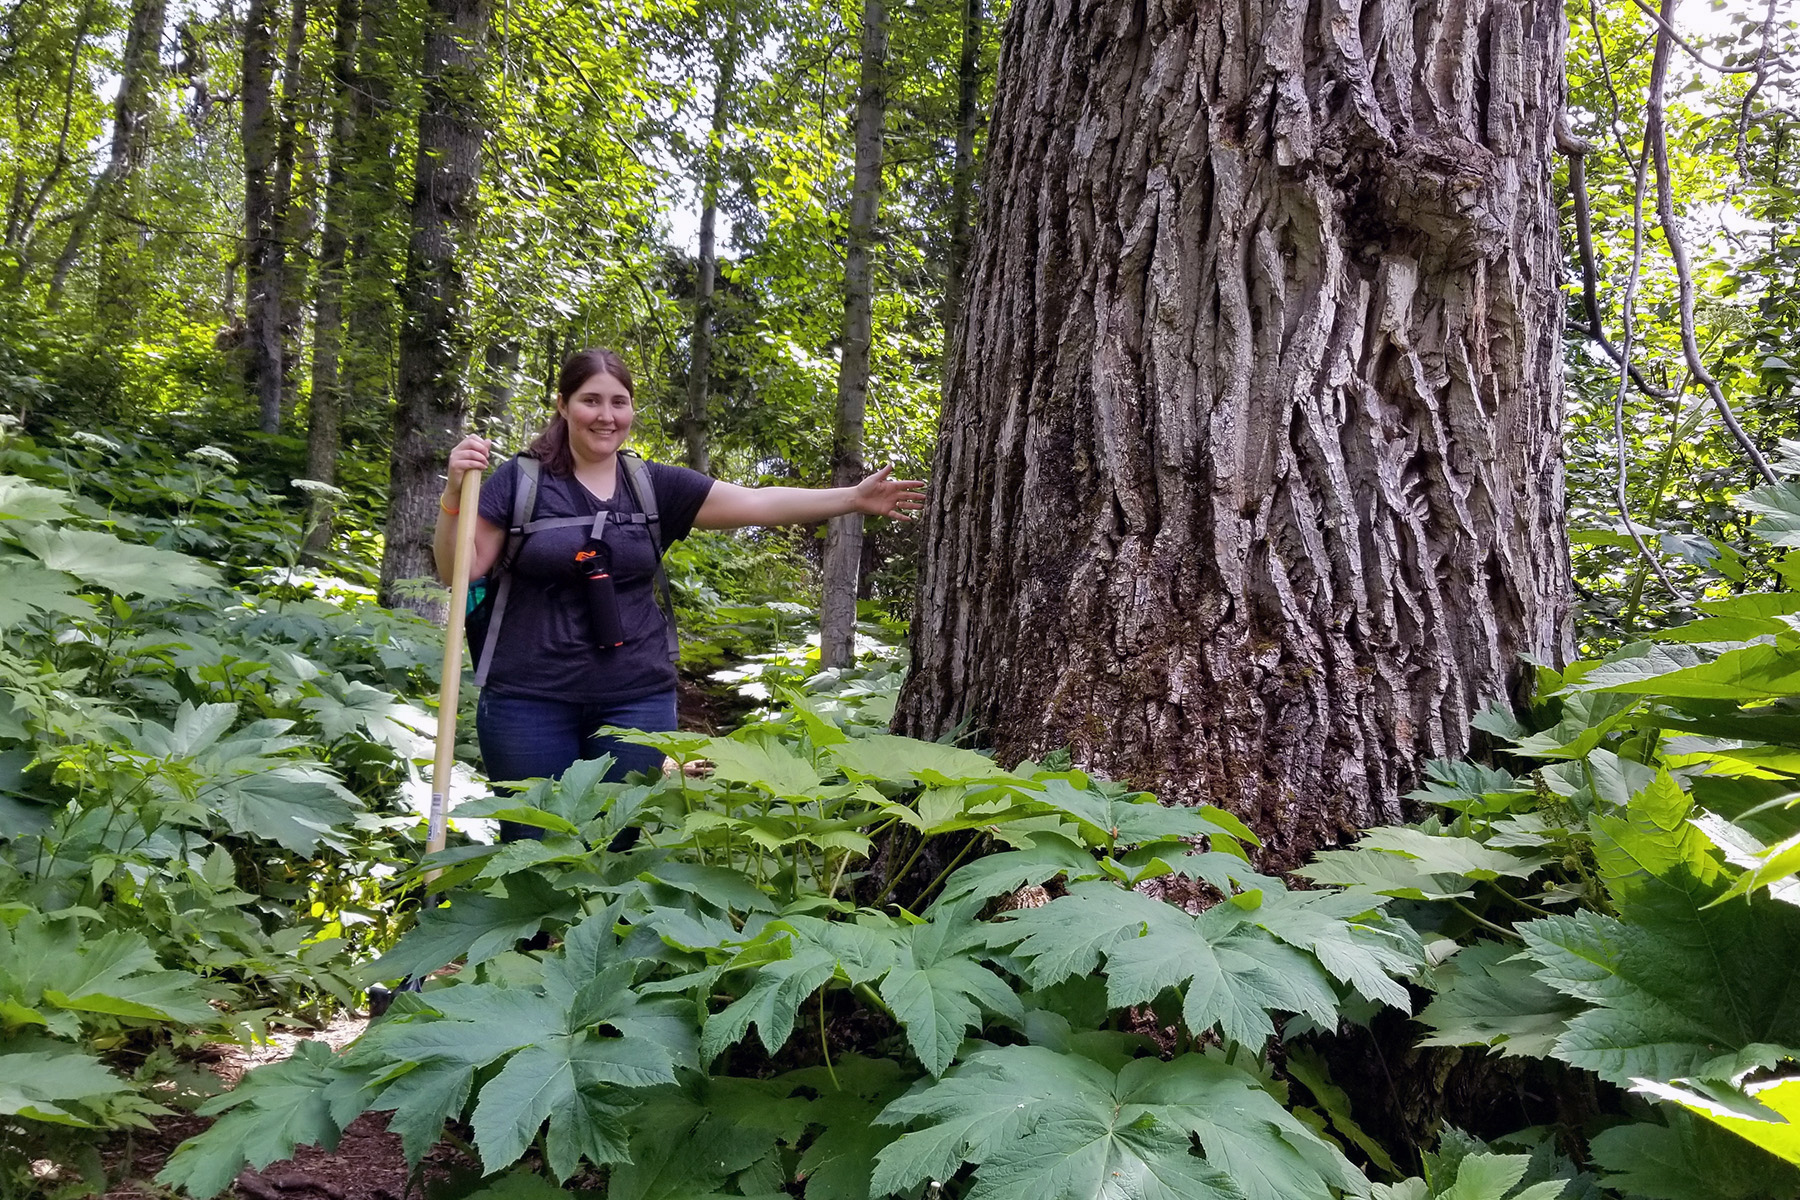 A student stands with arm out to a tree with a wide trunk surrounded by large Devil's Club plants.